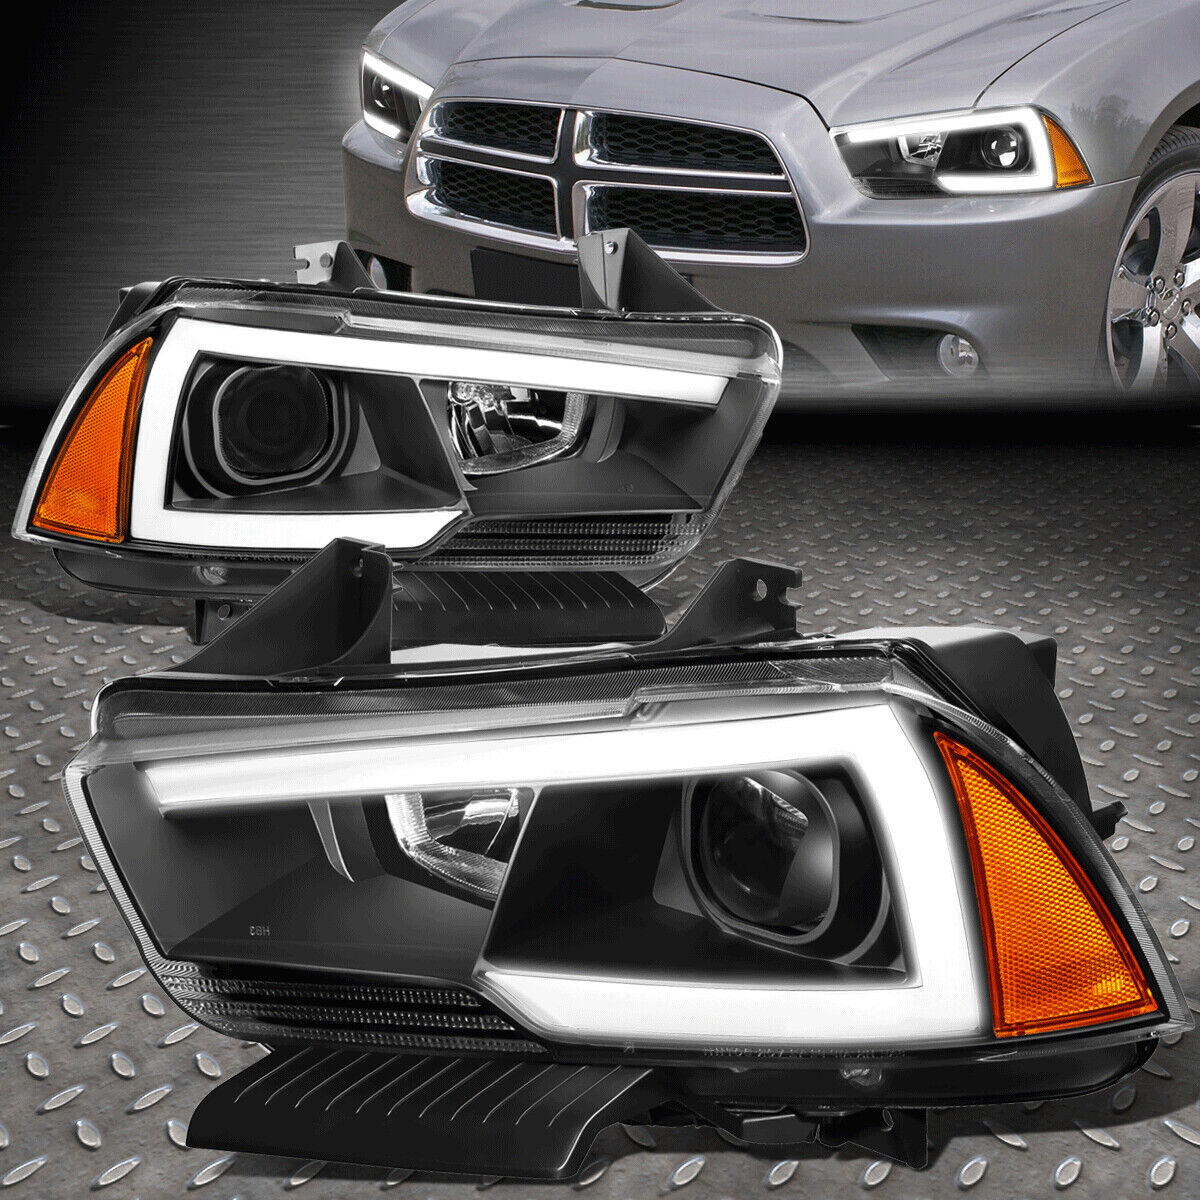 [LED DRL] FOR 11-14 DODGE CHARGER BLACK AMBER PROJECTOR HEADLIGHT HEAD LAMPS SET